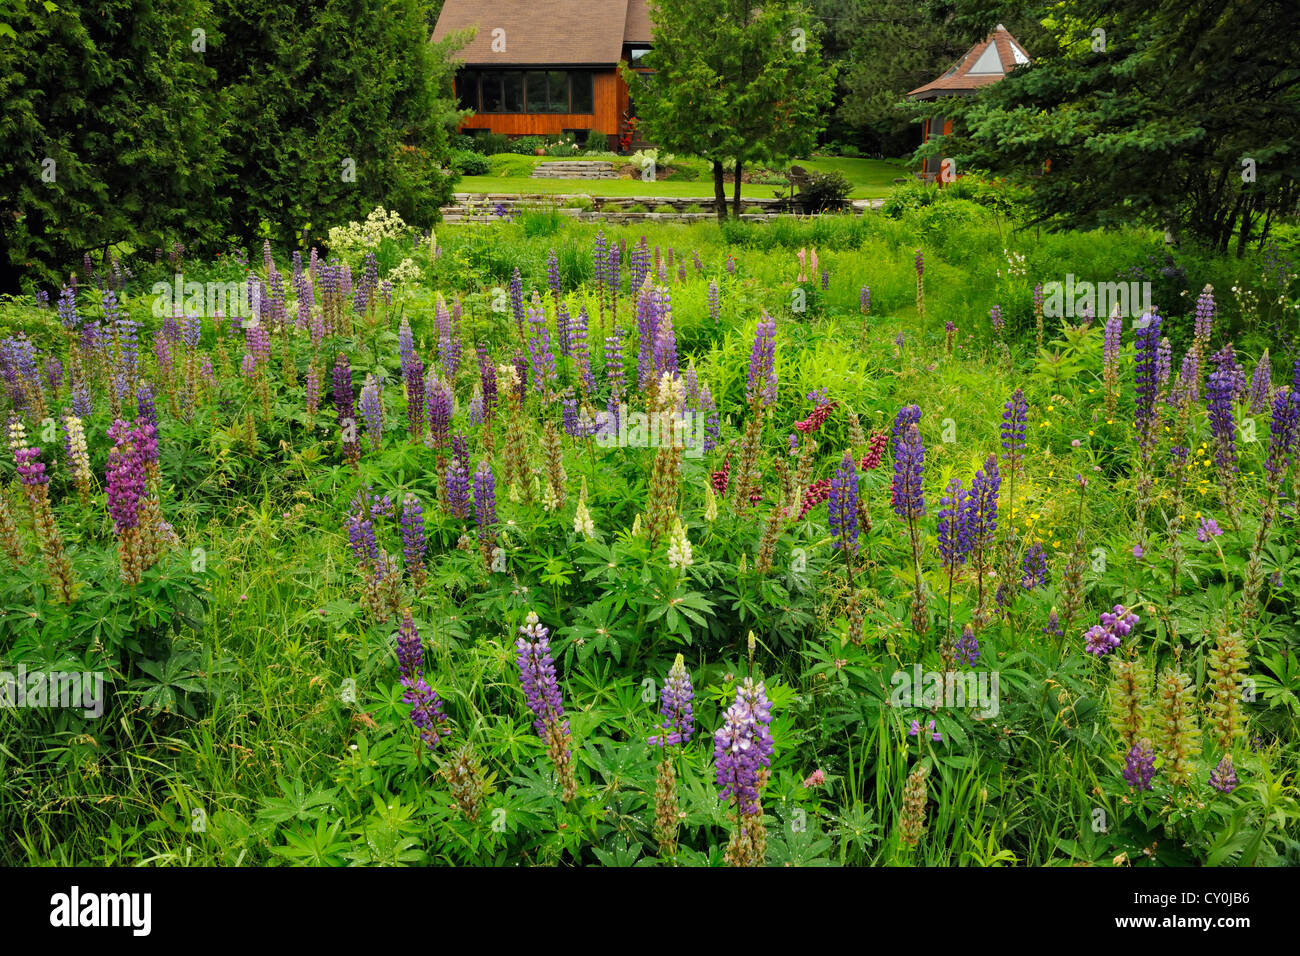 Naturalized garden meadow with lupines, Greater Sudbury, Ontario, Canada Stock Photo